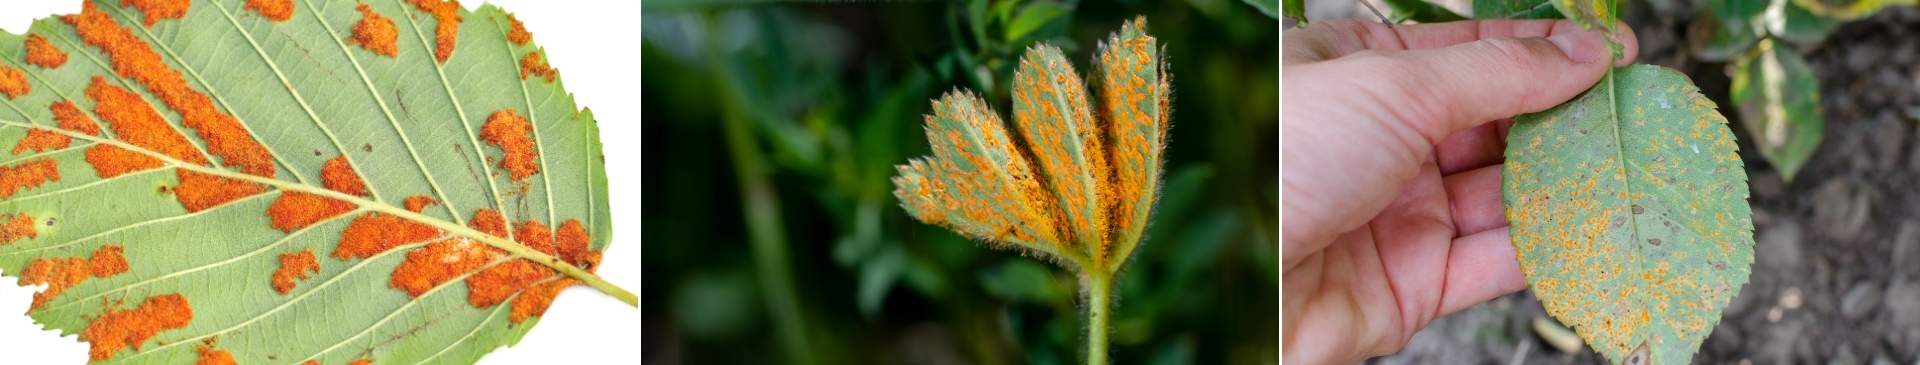 Rust Fungus: Controlling and Preventing Infection in the Garden